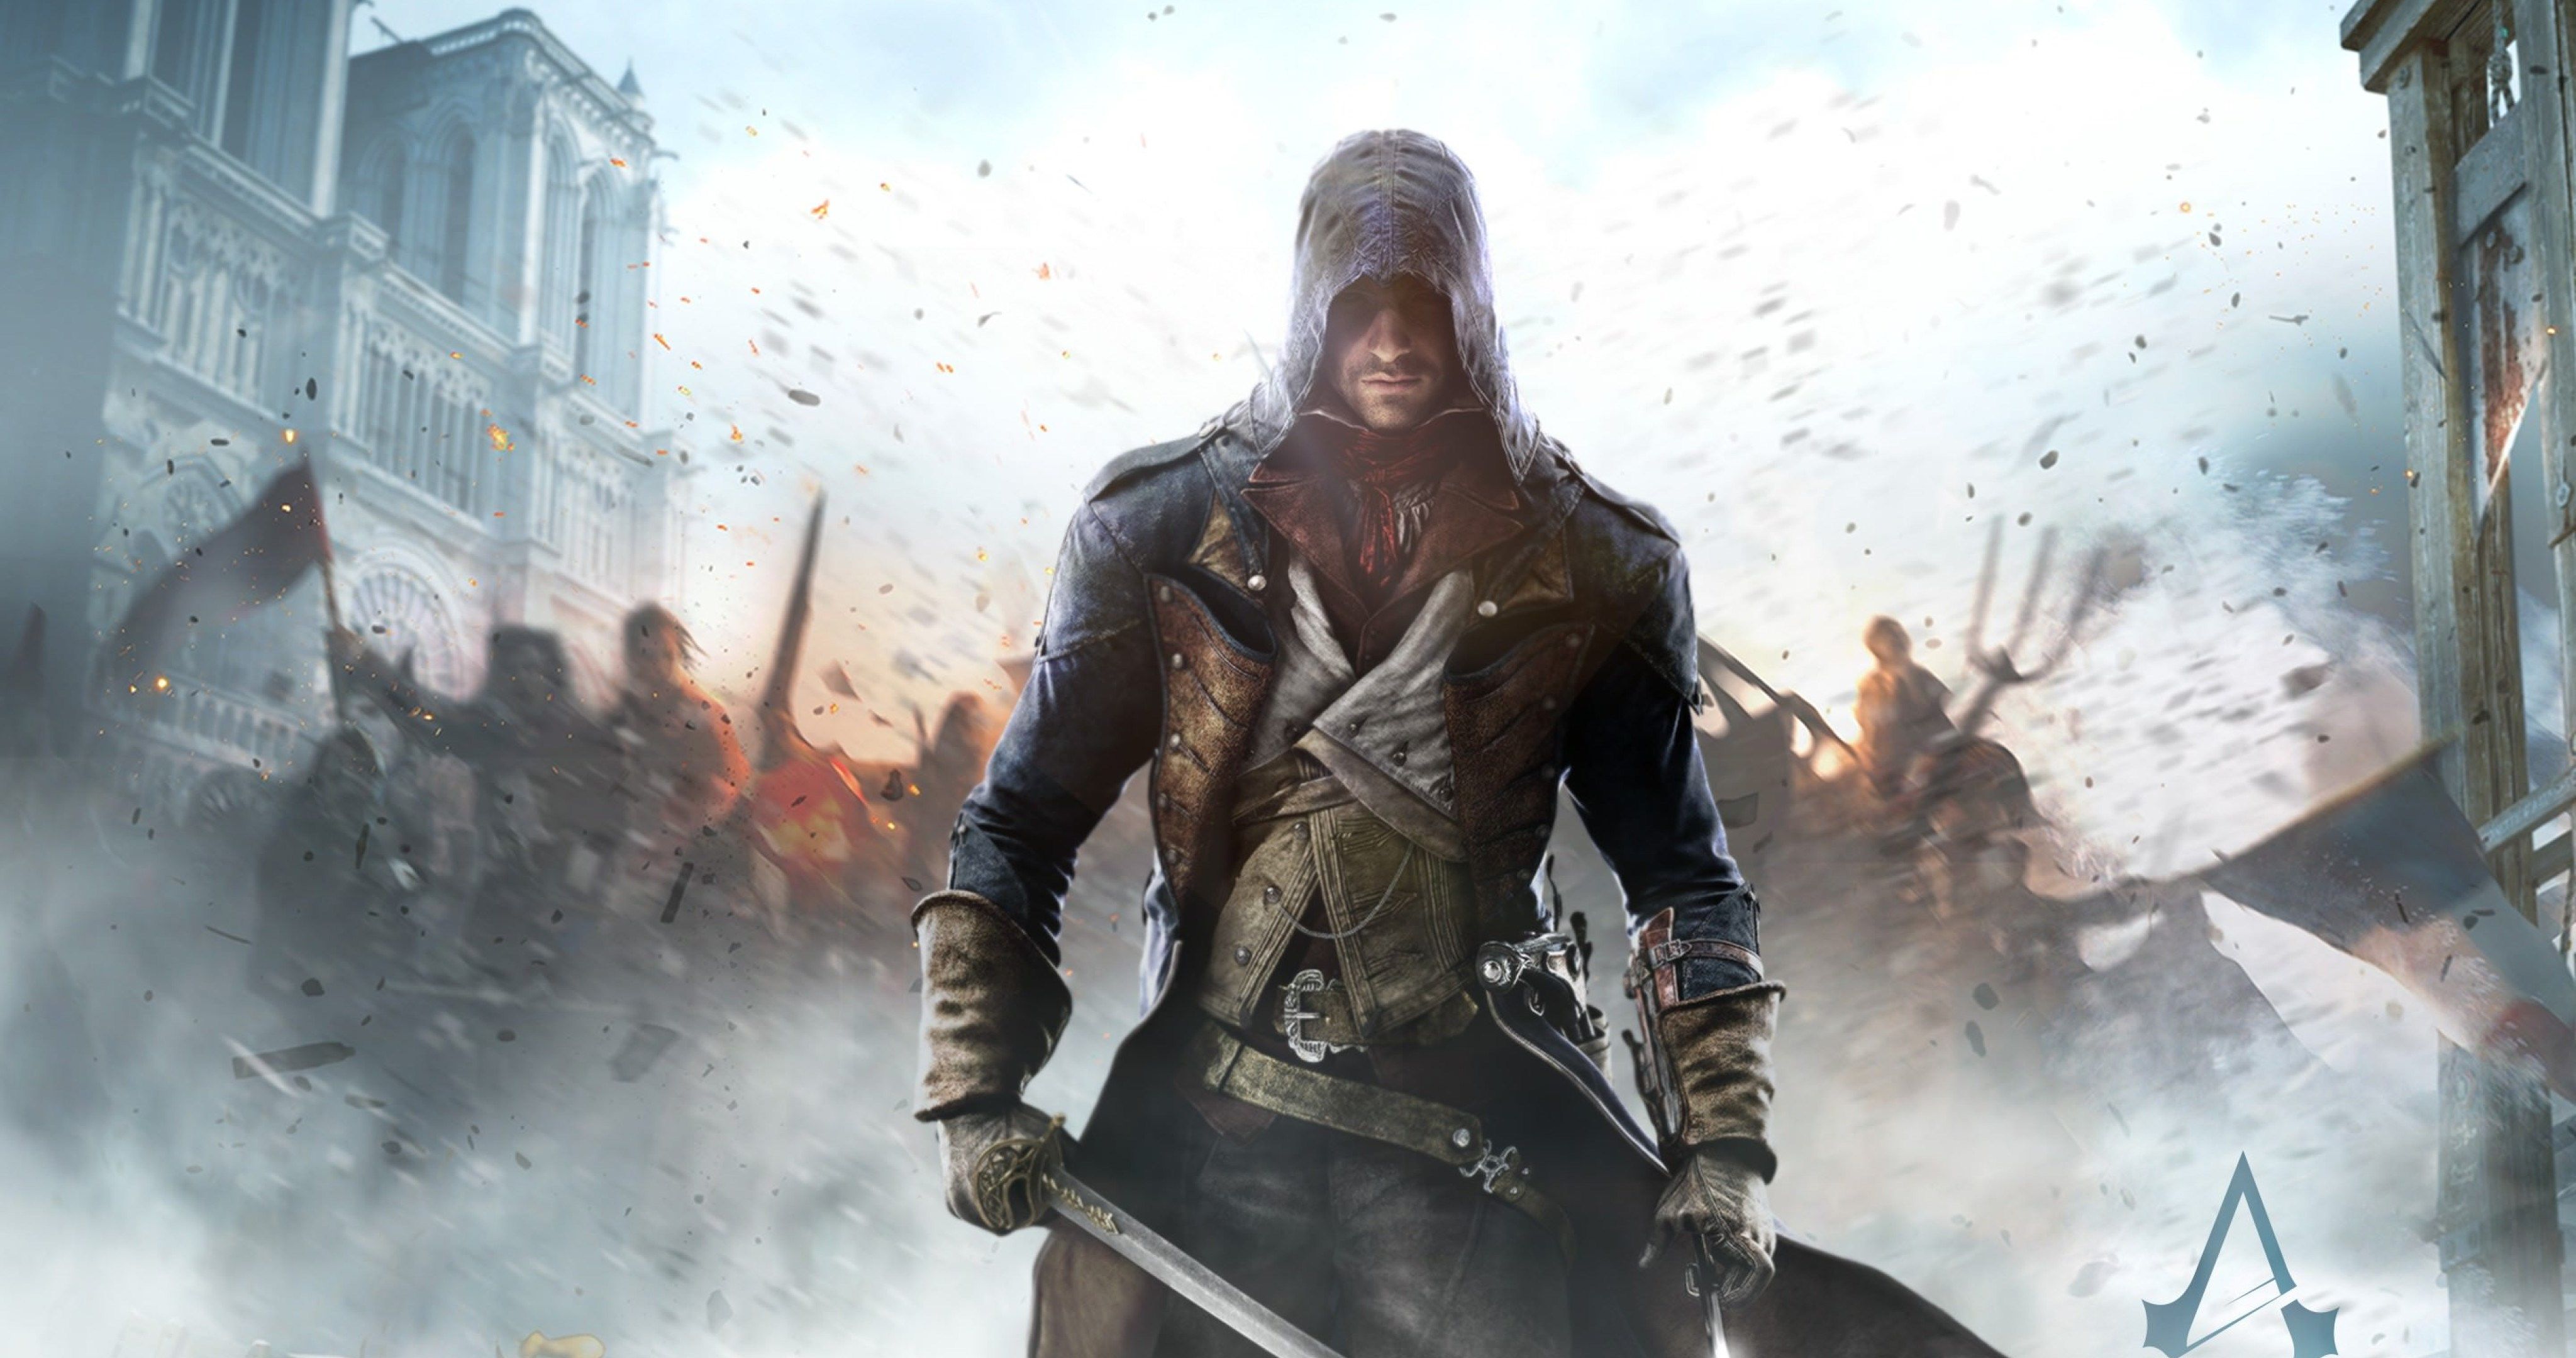 assassin's creed wallpaper download,action adventure game,pc game,adventure game,fictional character,screenshot